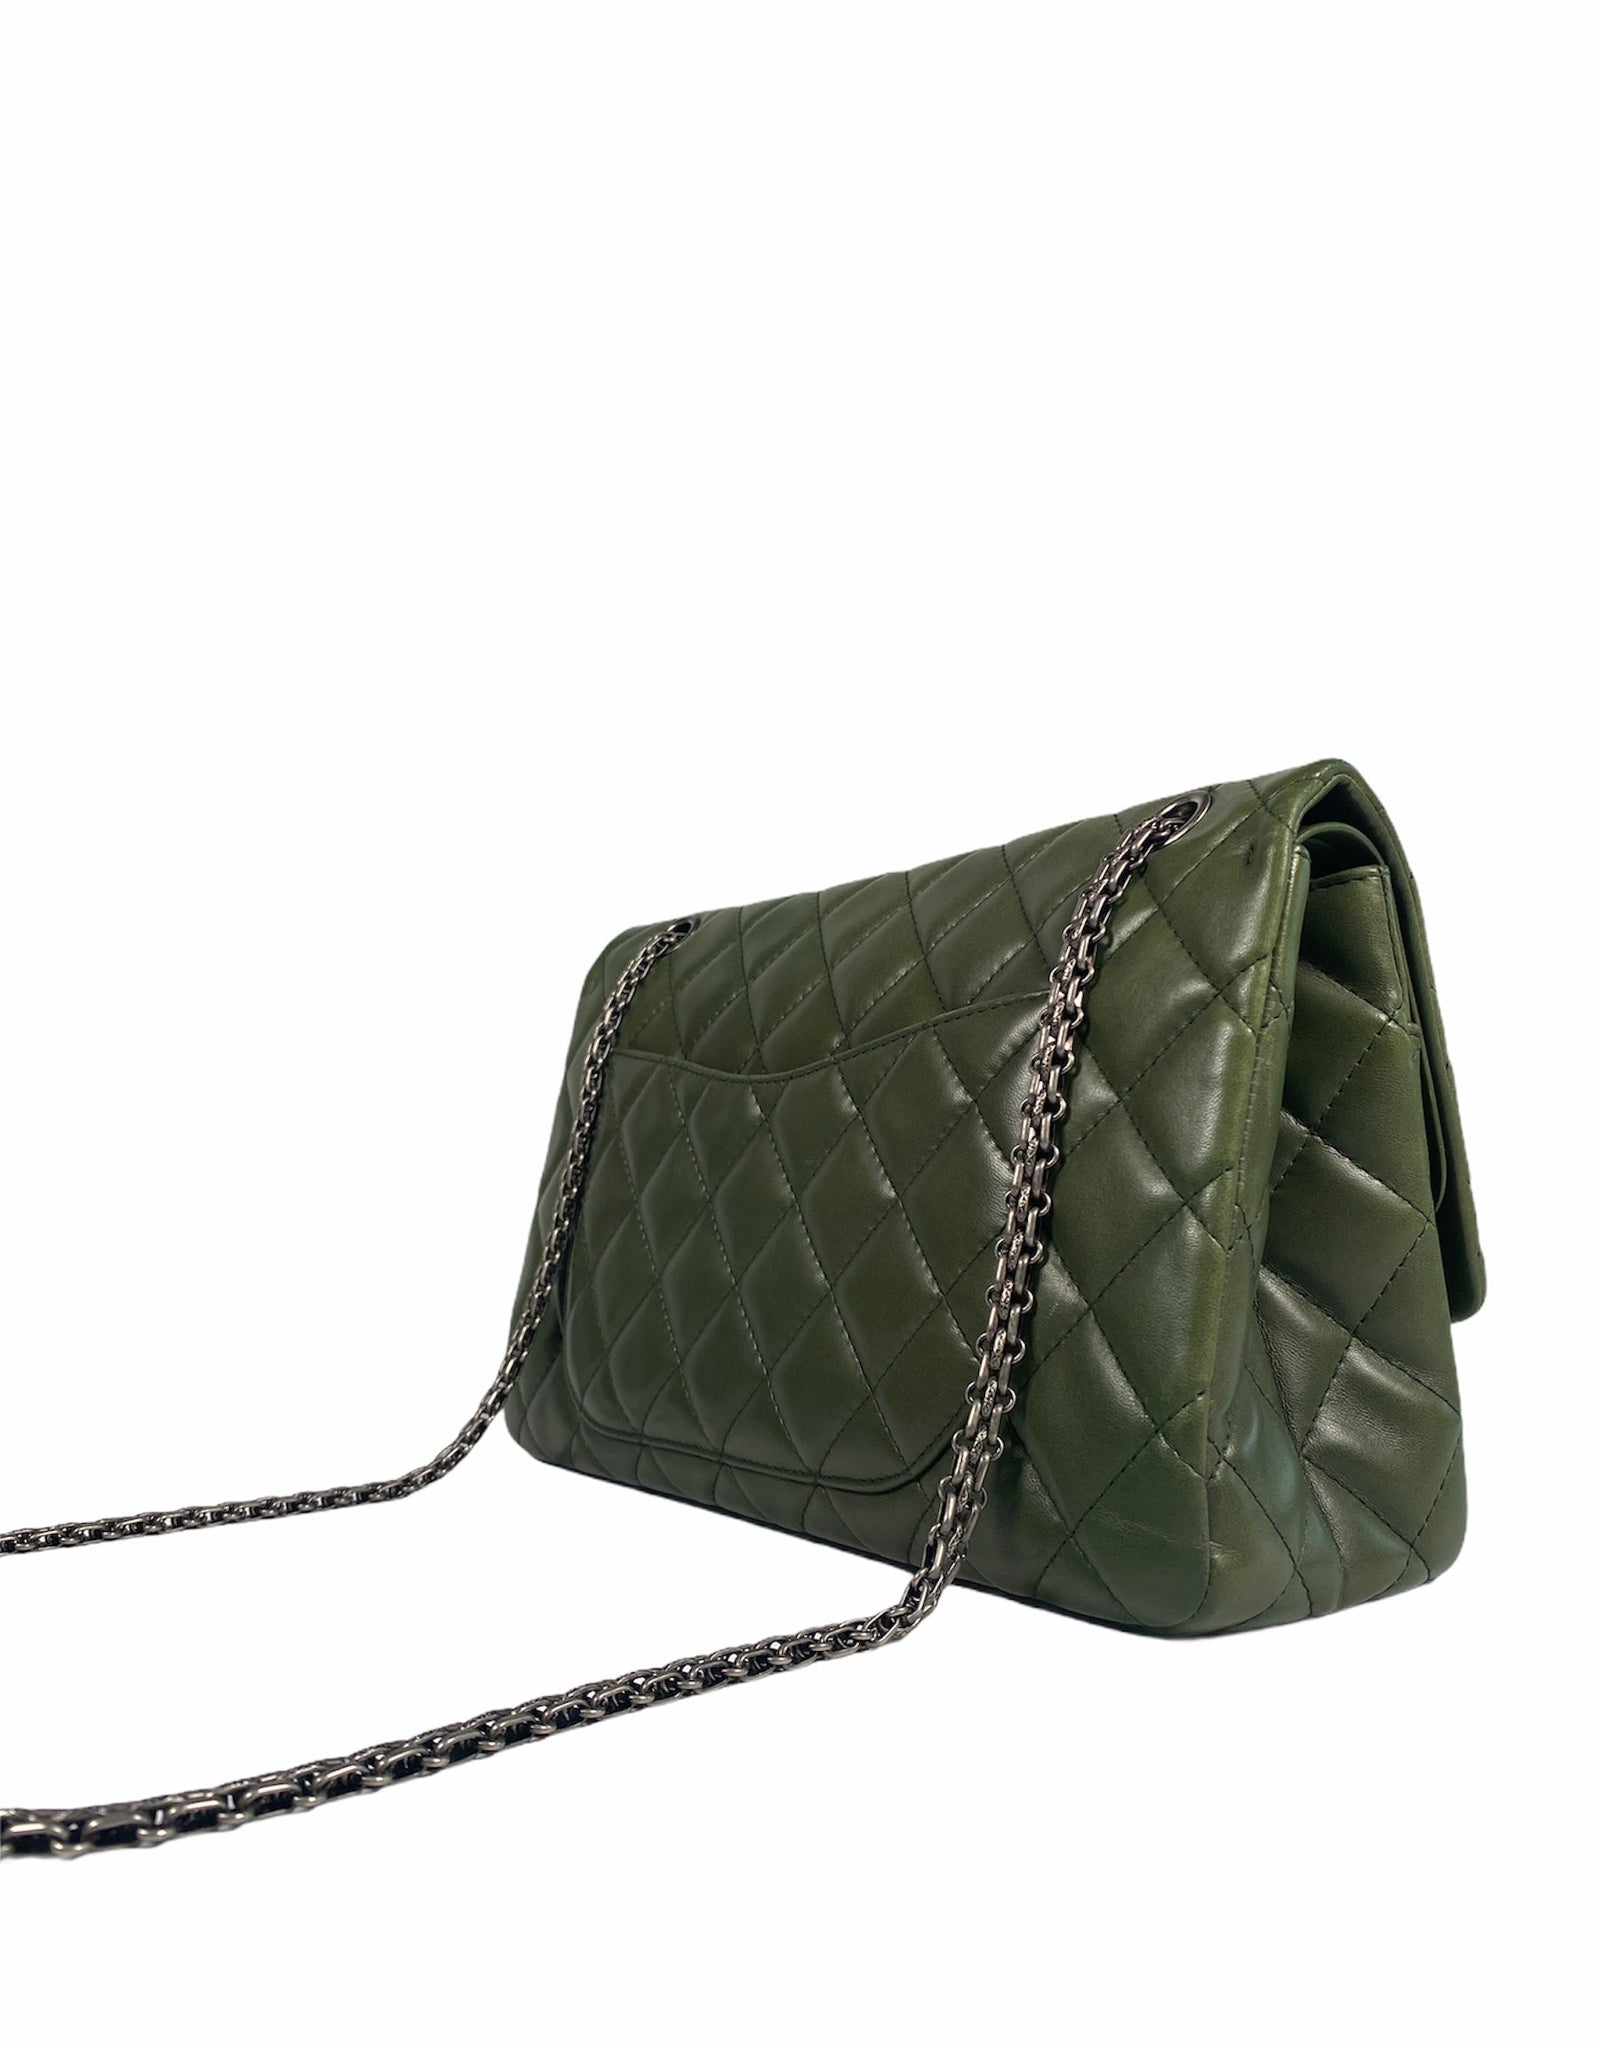 Chanel 2.55, reissue 227 – LuxCollector Vintage